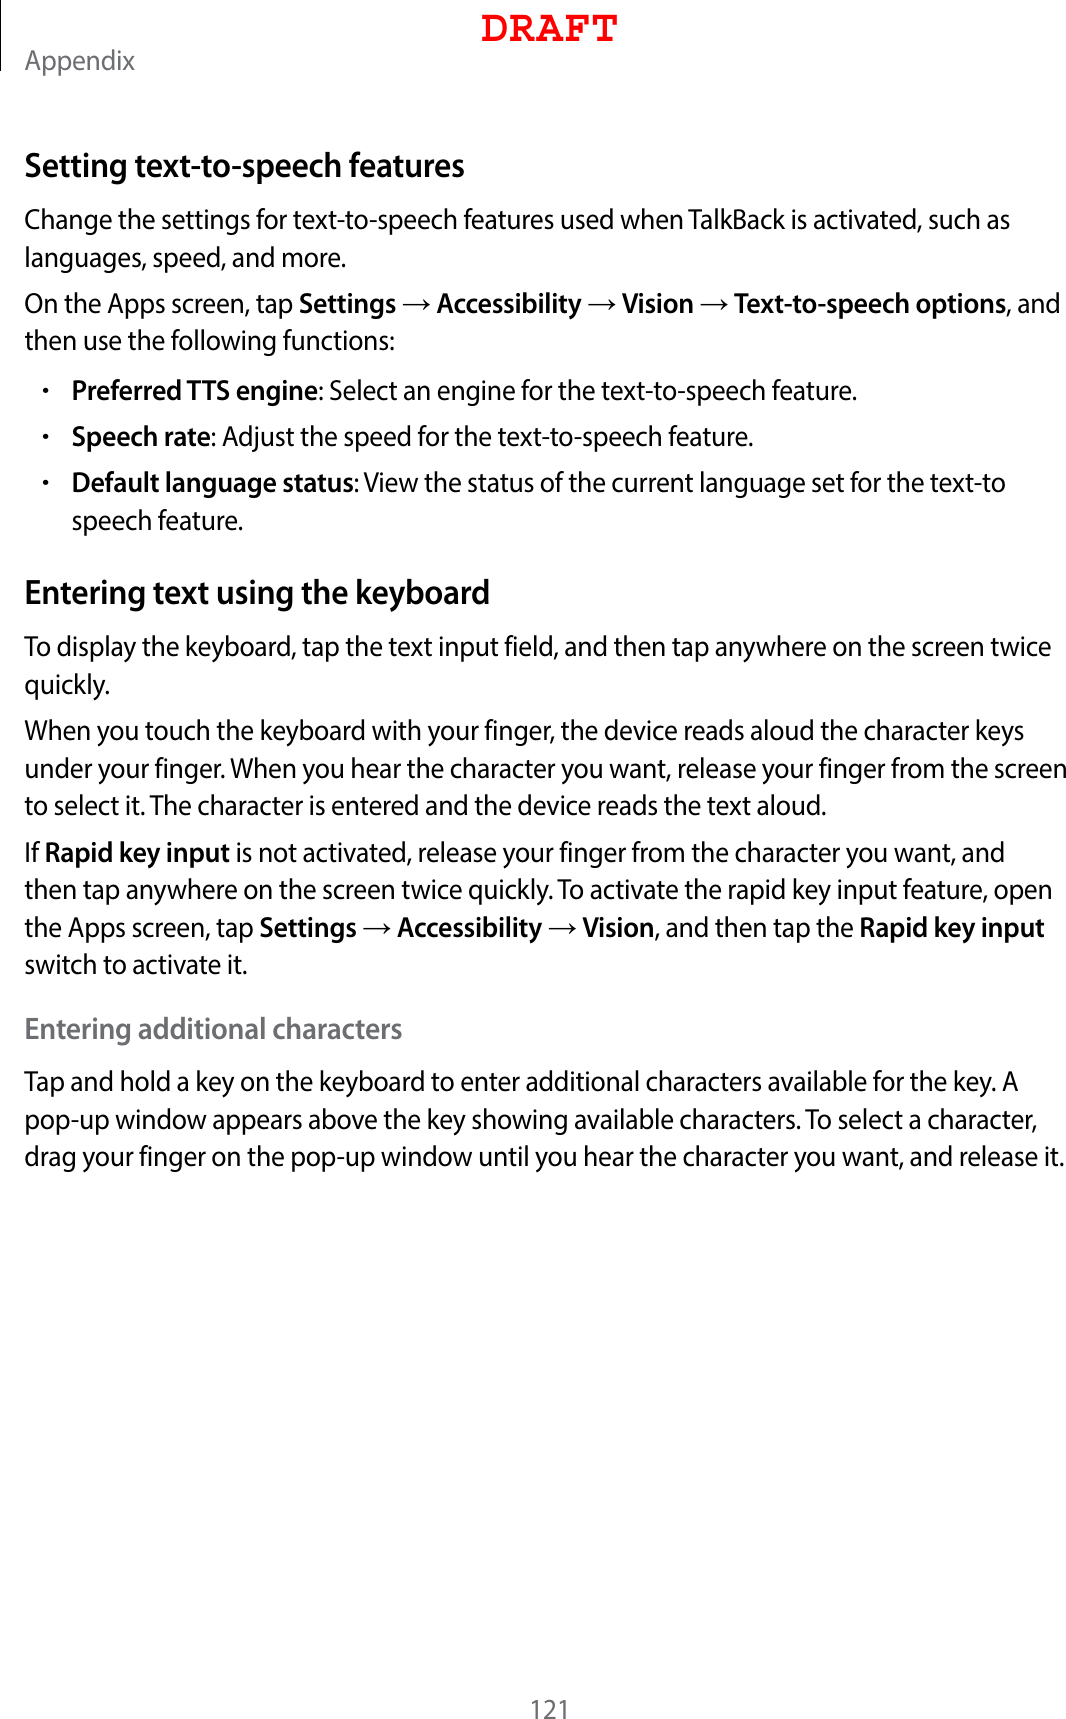 Appendix121Setting text-to-speech featuresChange the settings for text-to-speech features used when TalkBack is activated, such as languages, speed, and more.On the Apps screen, tap Settings  Accessibility  Vision  Text-to-speech options, and then use the following functions:•Preferred TTS engine: Select an engine for the text-to-speech feature.•Speech rate: Adjust the speed for the text-to-speech feature.•Default language status: View the status of the current language set for the text-to speech feature.Entering text using the keyboardTo display the keyboard, tap the text input field, and then tap anywhere on the screen twice quickly.When you touch the keyboard with your finger, the device reads aloud the character keys under your finger. When you hear the character you want, release your finger from the screen to select it. The character is entered and the device reads the text aloud.If Rapid key input is not activated, release your finger from the character you want, and then tap anywhere on the screen twice quickly. To activate the rapid key input feature, open the Apps screen, tap Settings  Accessibility  Vision, and then tap the Rapid key input switch to activate it.Entering additional charactersTap and hold a key on the keyboard to enter additional characters available for the key. A pop-up window appears above the key showing available characters. To select a character, drag your finger on the pop-up window until you hear the character you want, and release it.DRAFT